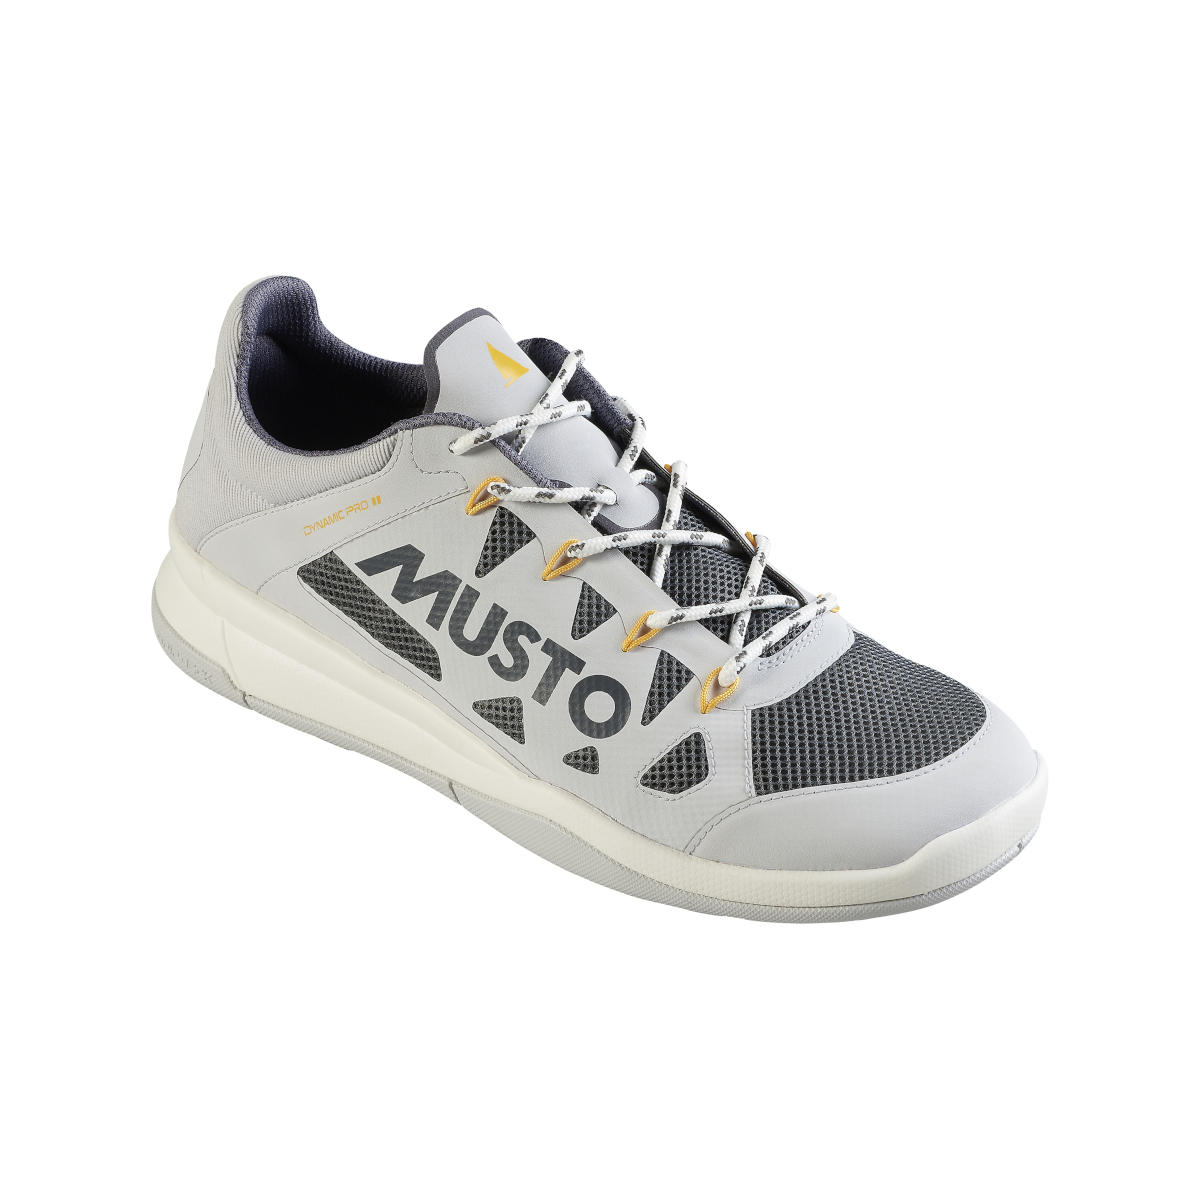 Musto Dynamic Pro II Adapt chaussures bateau homme gris clair / jaune, taille 41